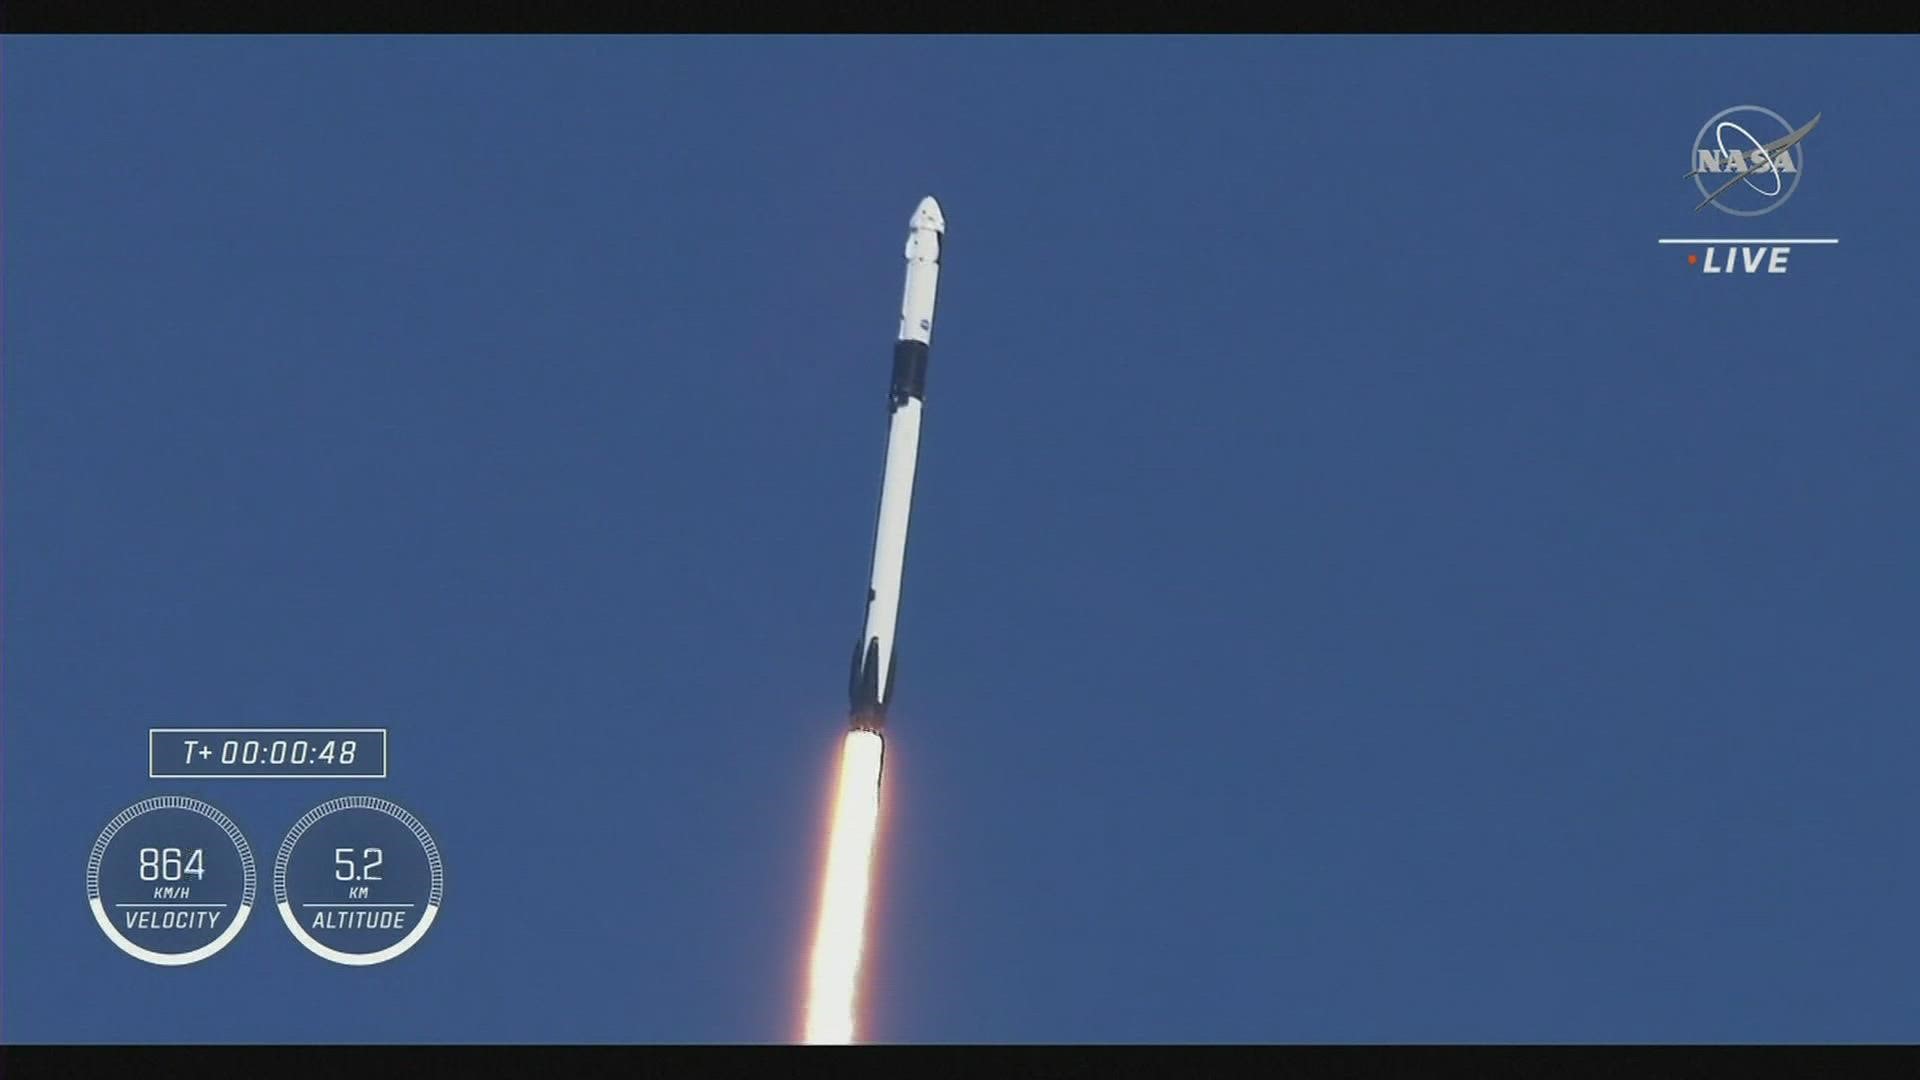 The Falcon 9 Rocket launched a 'Crew Dragon' spacecraft for its 8th flight with astronauts.